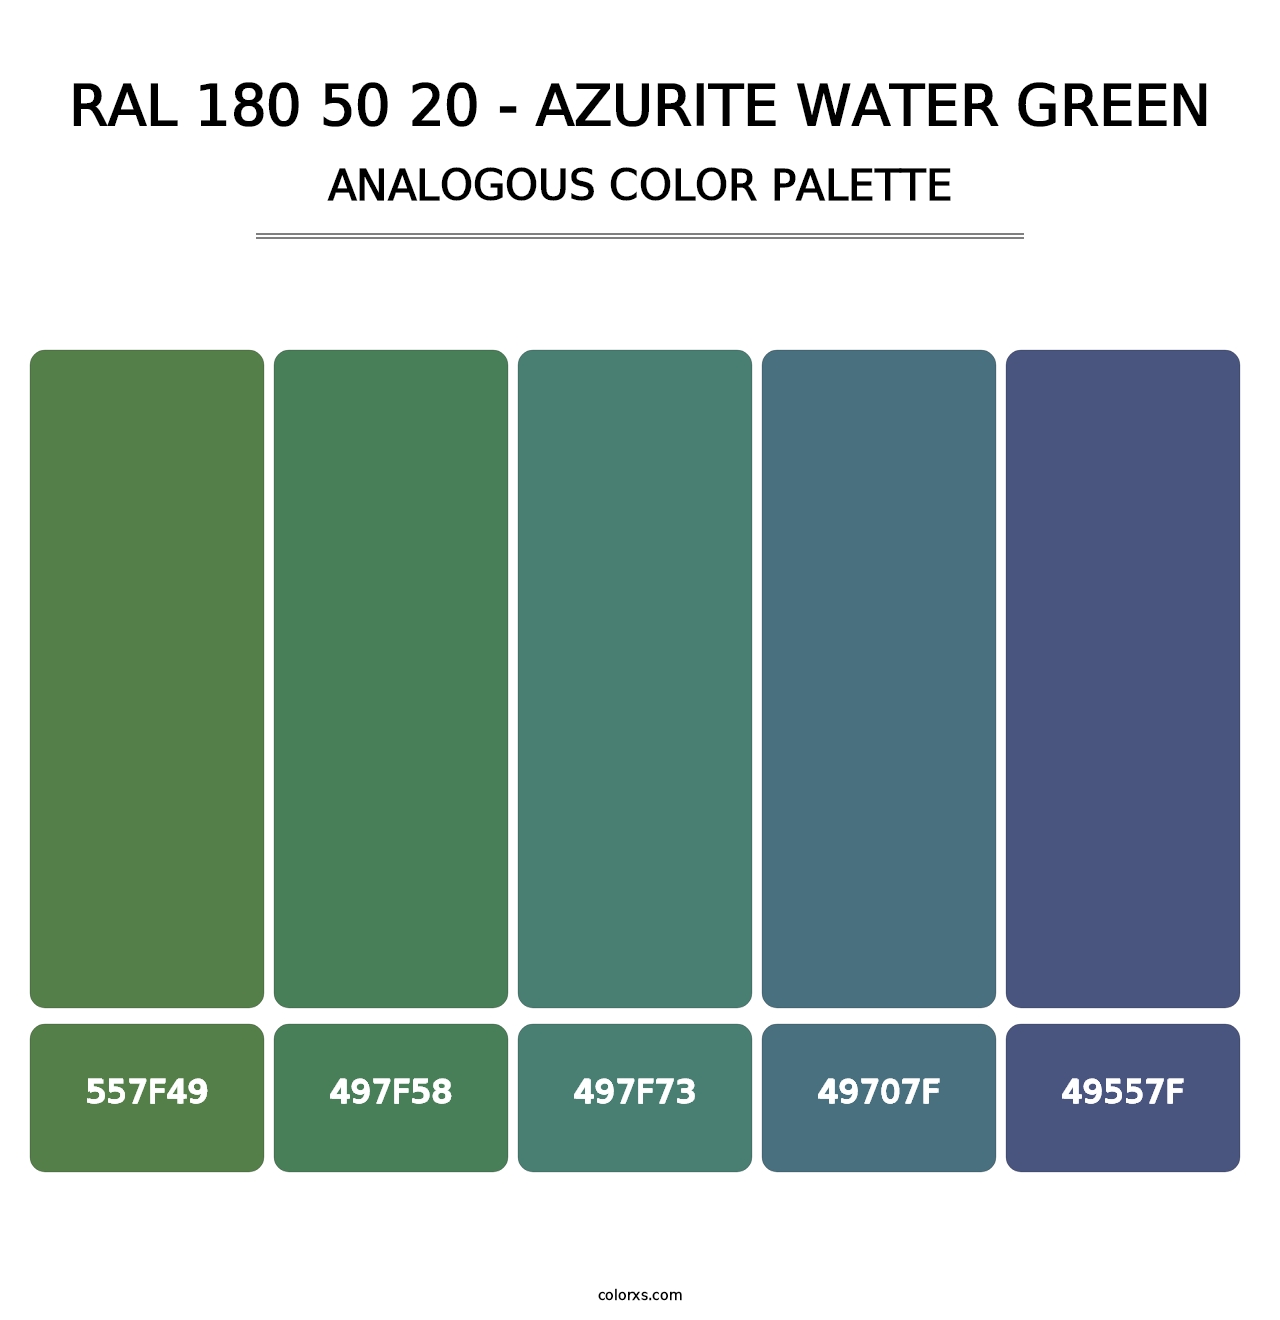 RAL 180 50 20 - Azurite Water Green - Analogous Color Palette